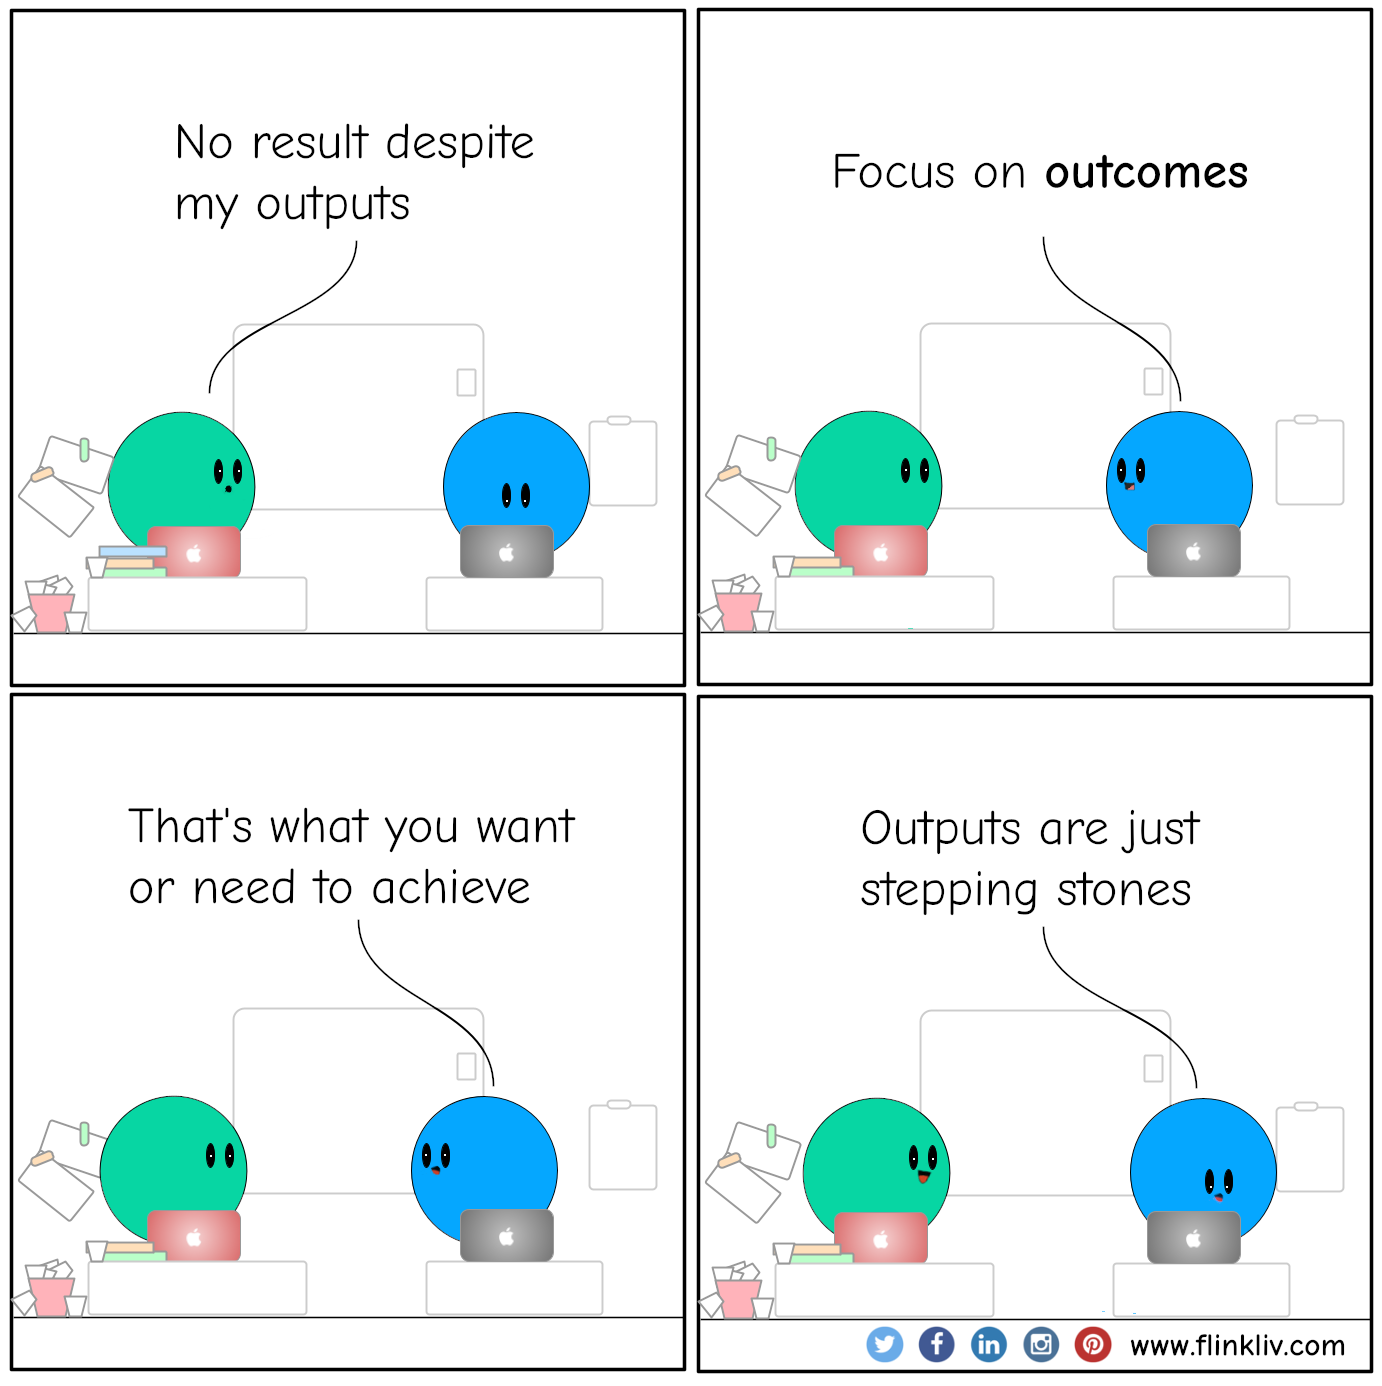 Conversation between A and B about outcomes vs outputs 
				A: No result despite my outputs
				B: Focus on outcomes.
				B: That's what you want or need to achieve.
				B: Outputs are just stepping stones.
              